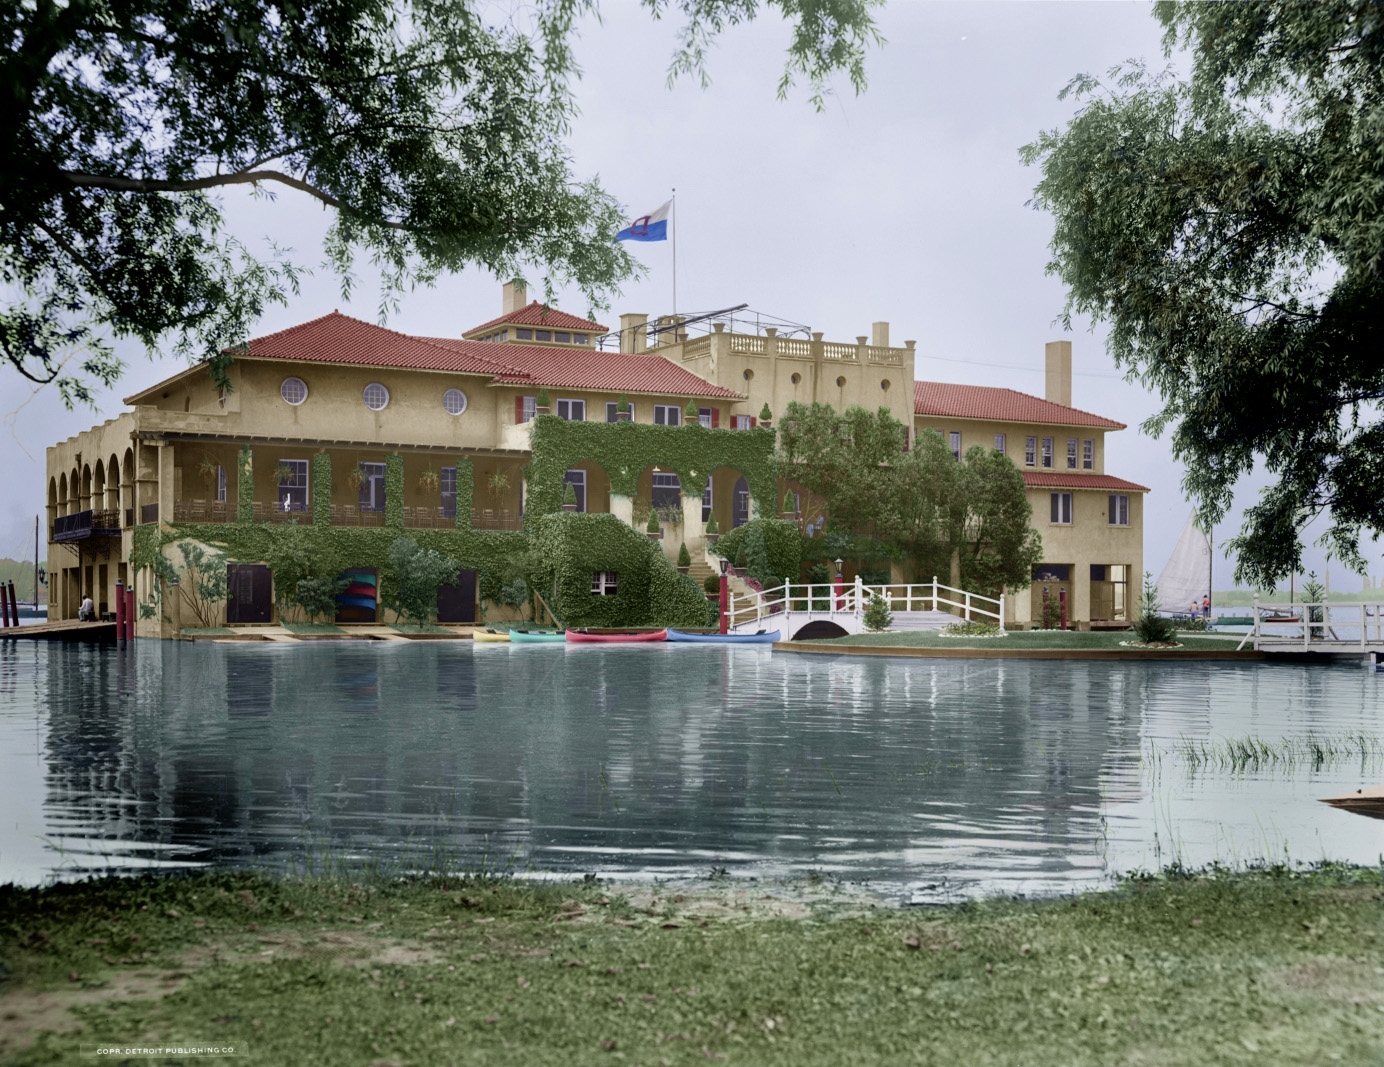 Detroit Boat Club, Belle Isle, Michigan, circa 1905. Library of Congress, Detroit Publishing Photo, colorized. View full size.